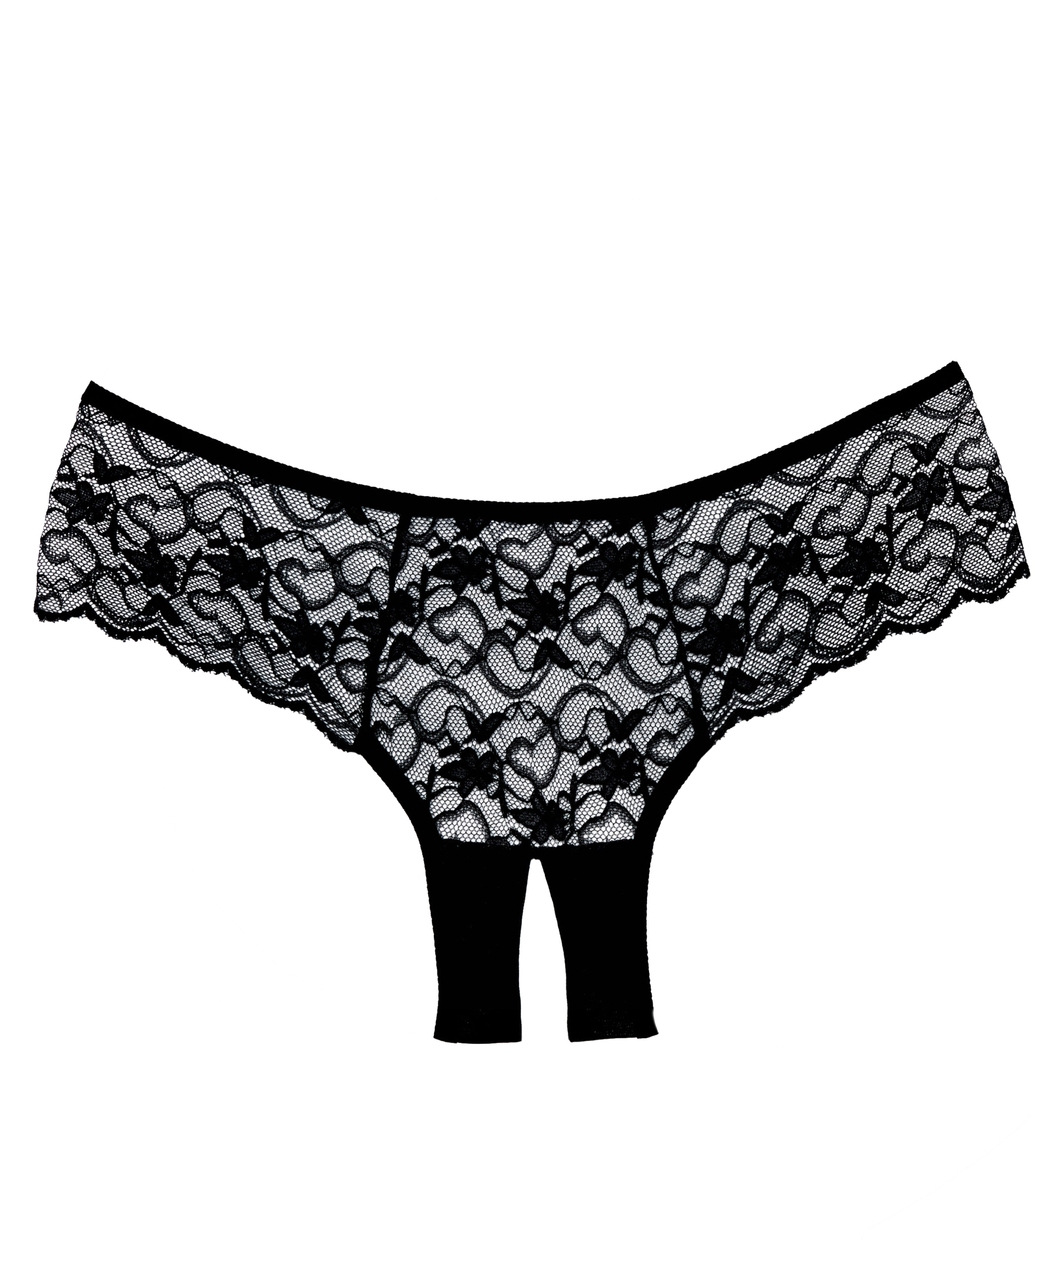 Allure Lingerie Sweetheart black lace crotchless shorts